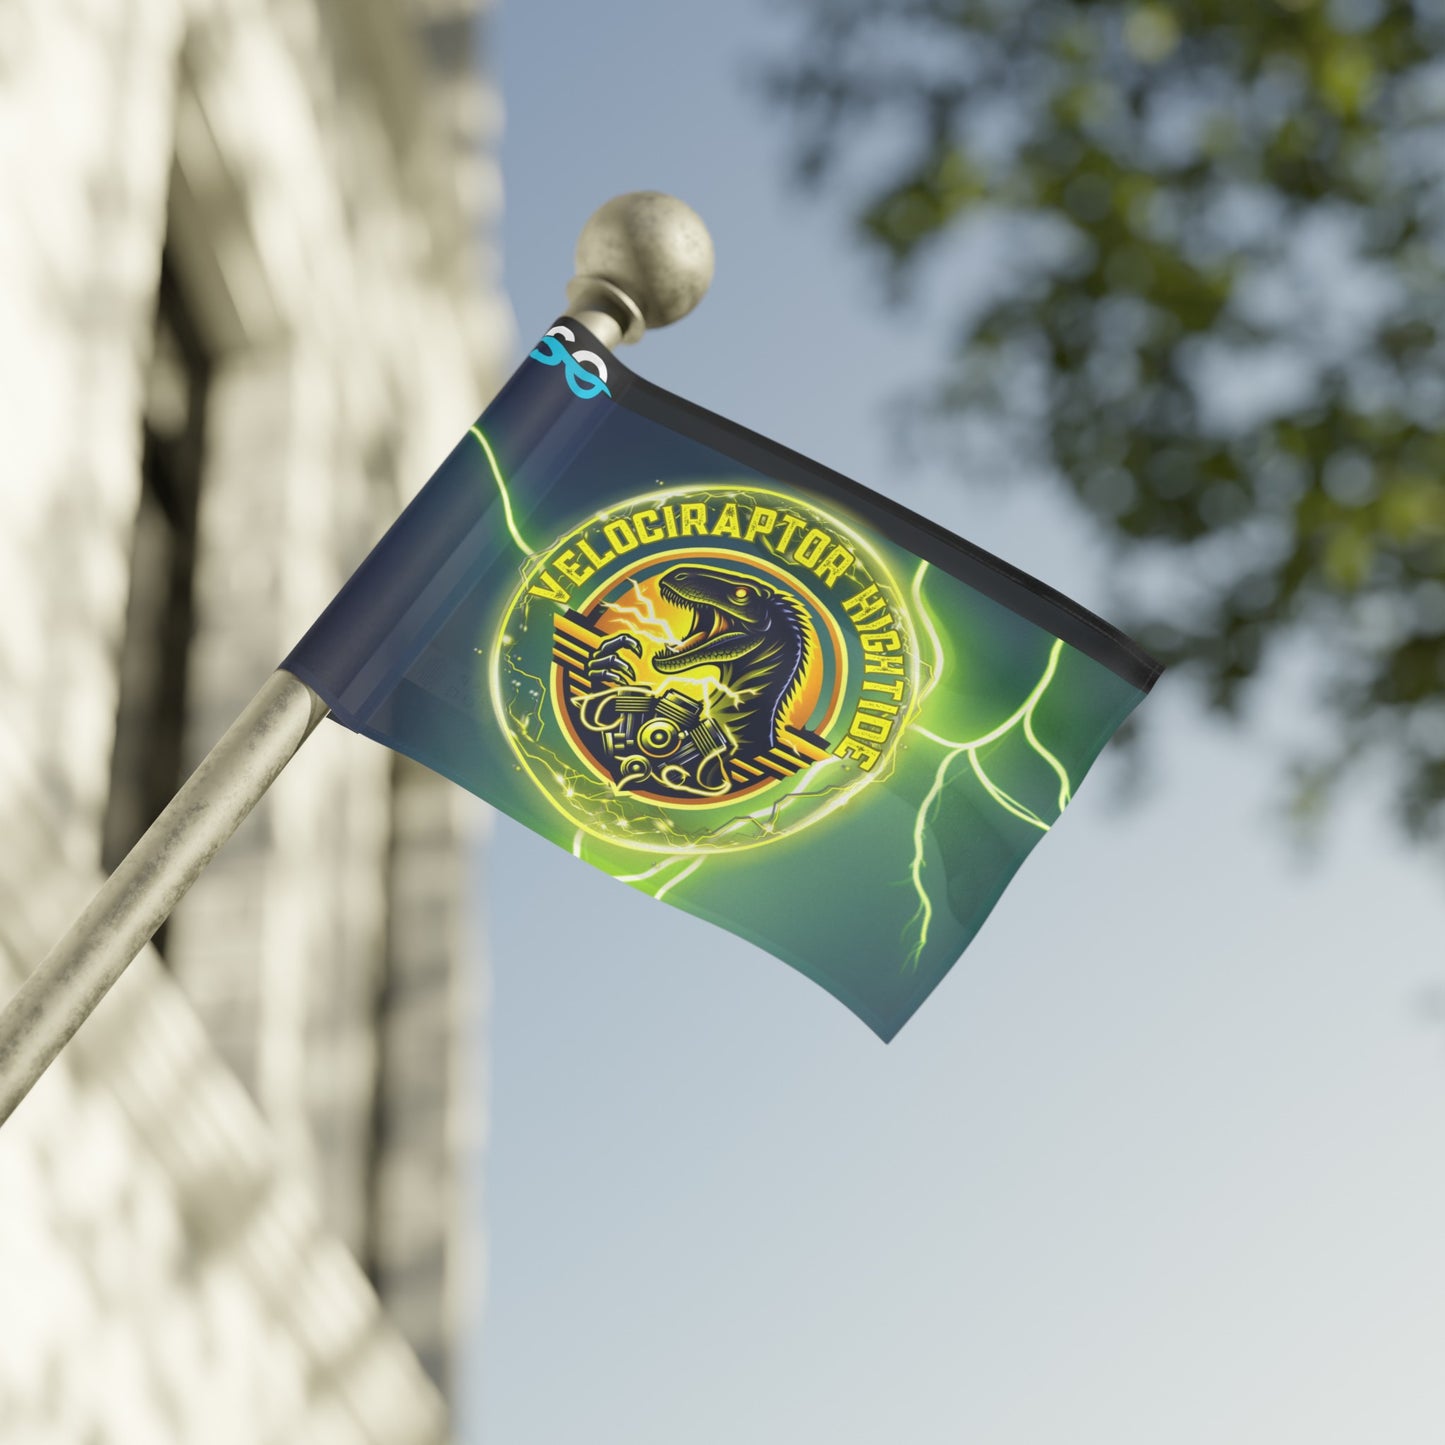 a flag with a dragon on it flying in the wind